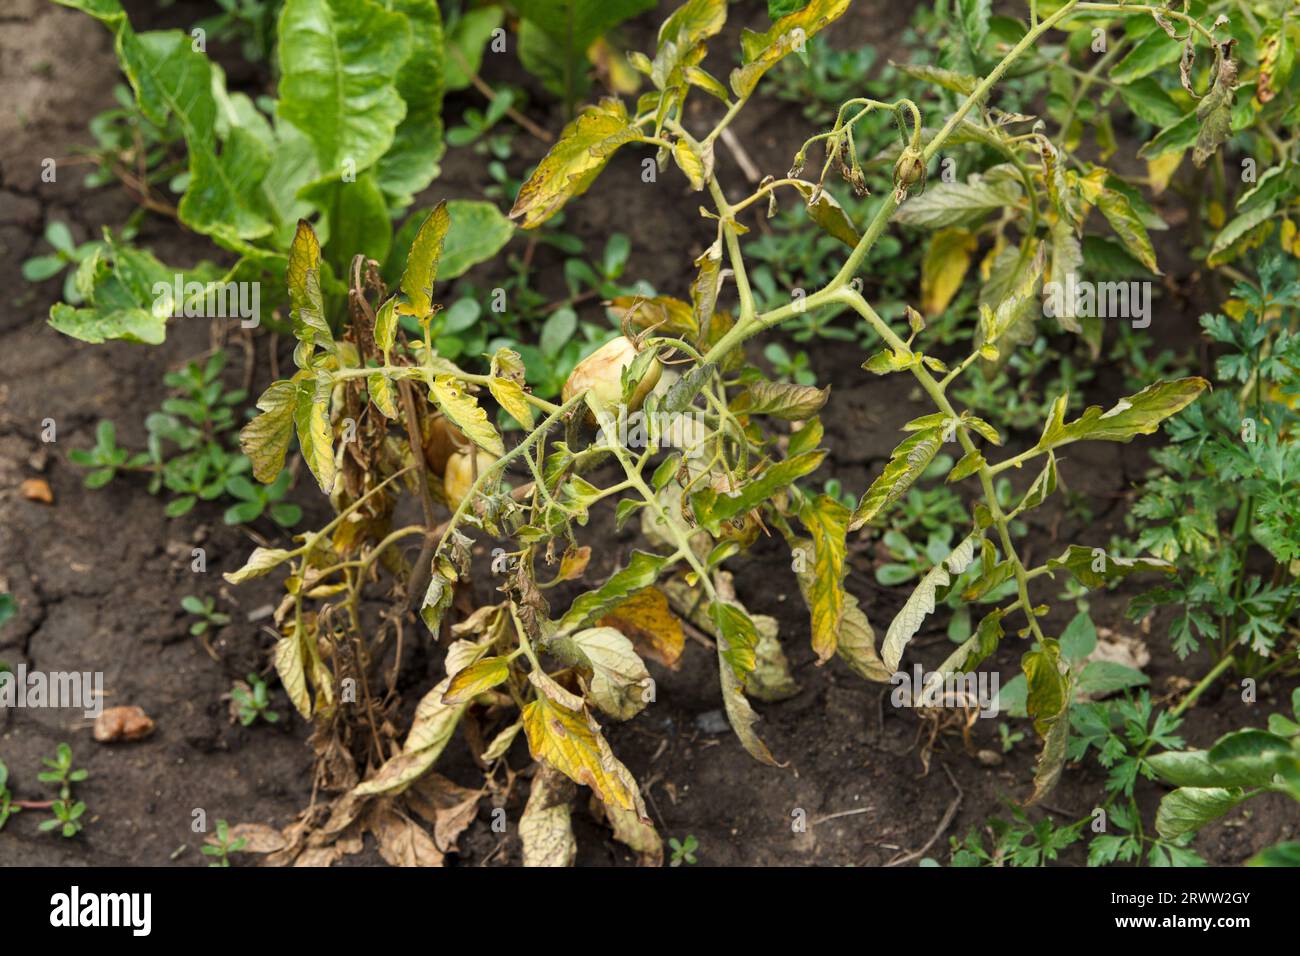 Tomatoes are sick in bed, dry and wilt, harvest dies, fruits of tomatoes are already large rot and dry due to various plant infections Stock Photo